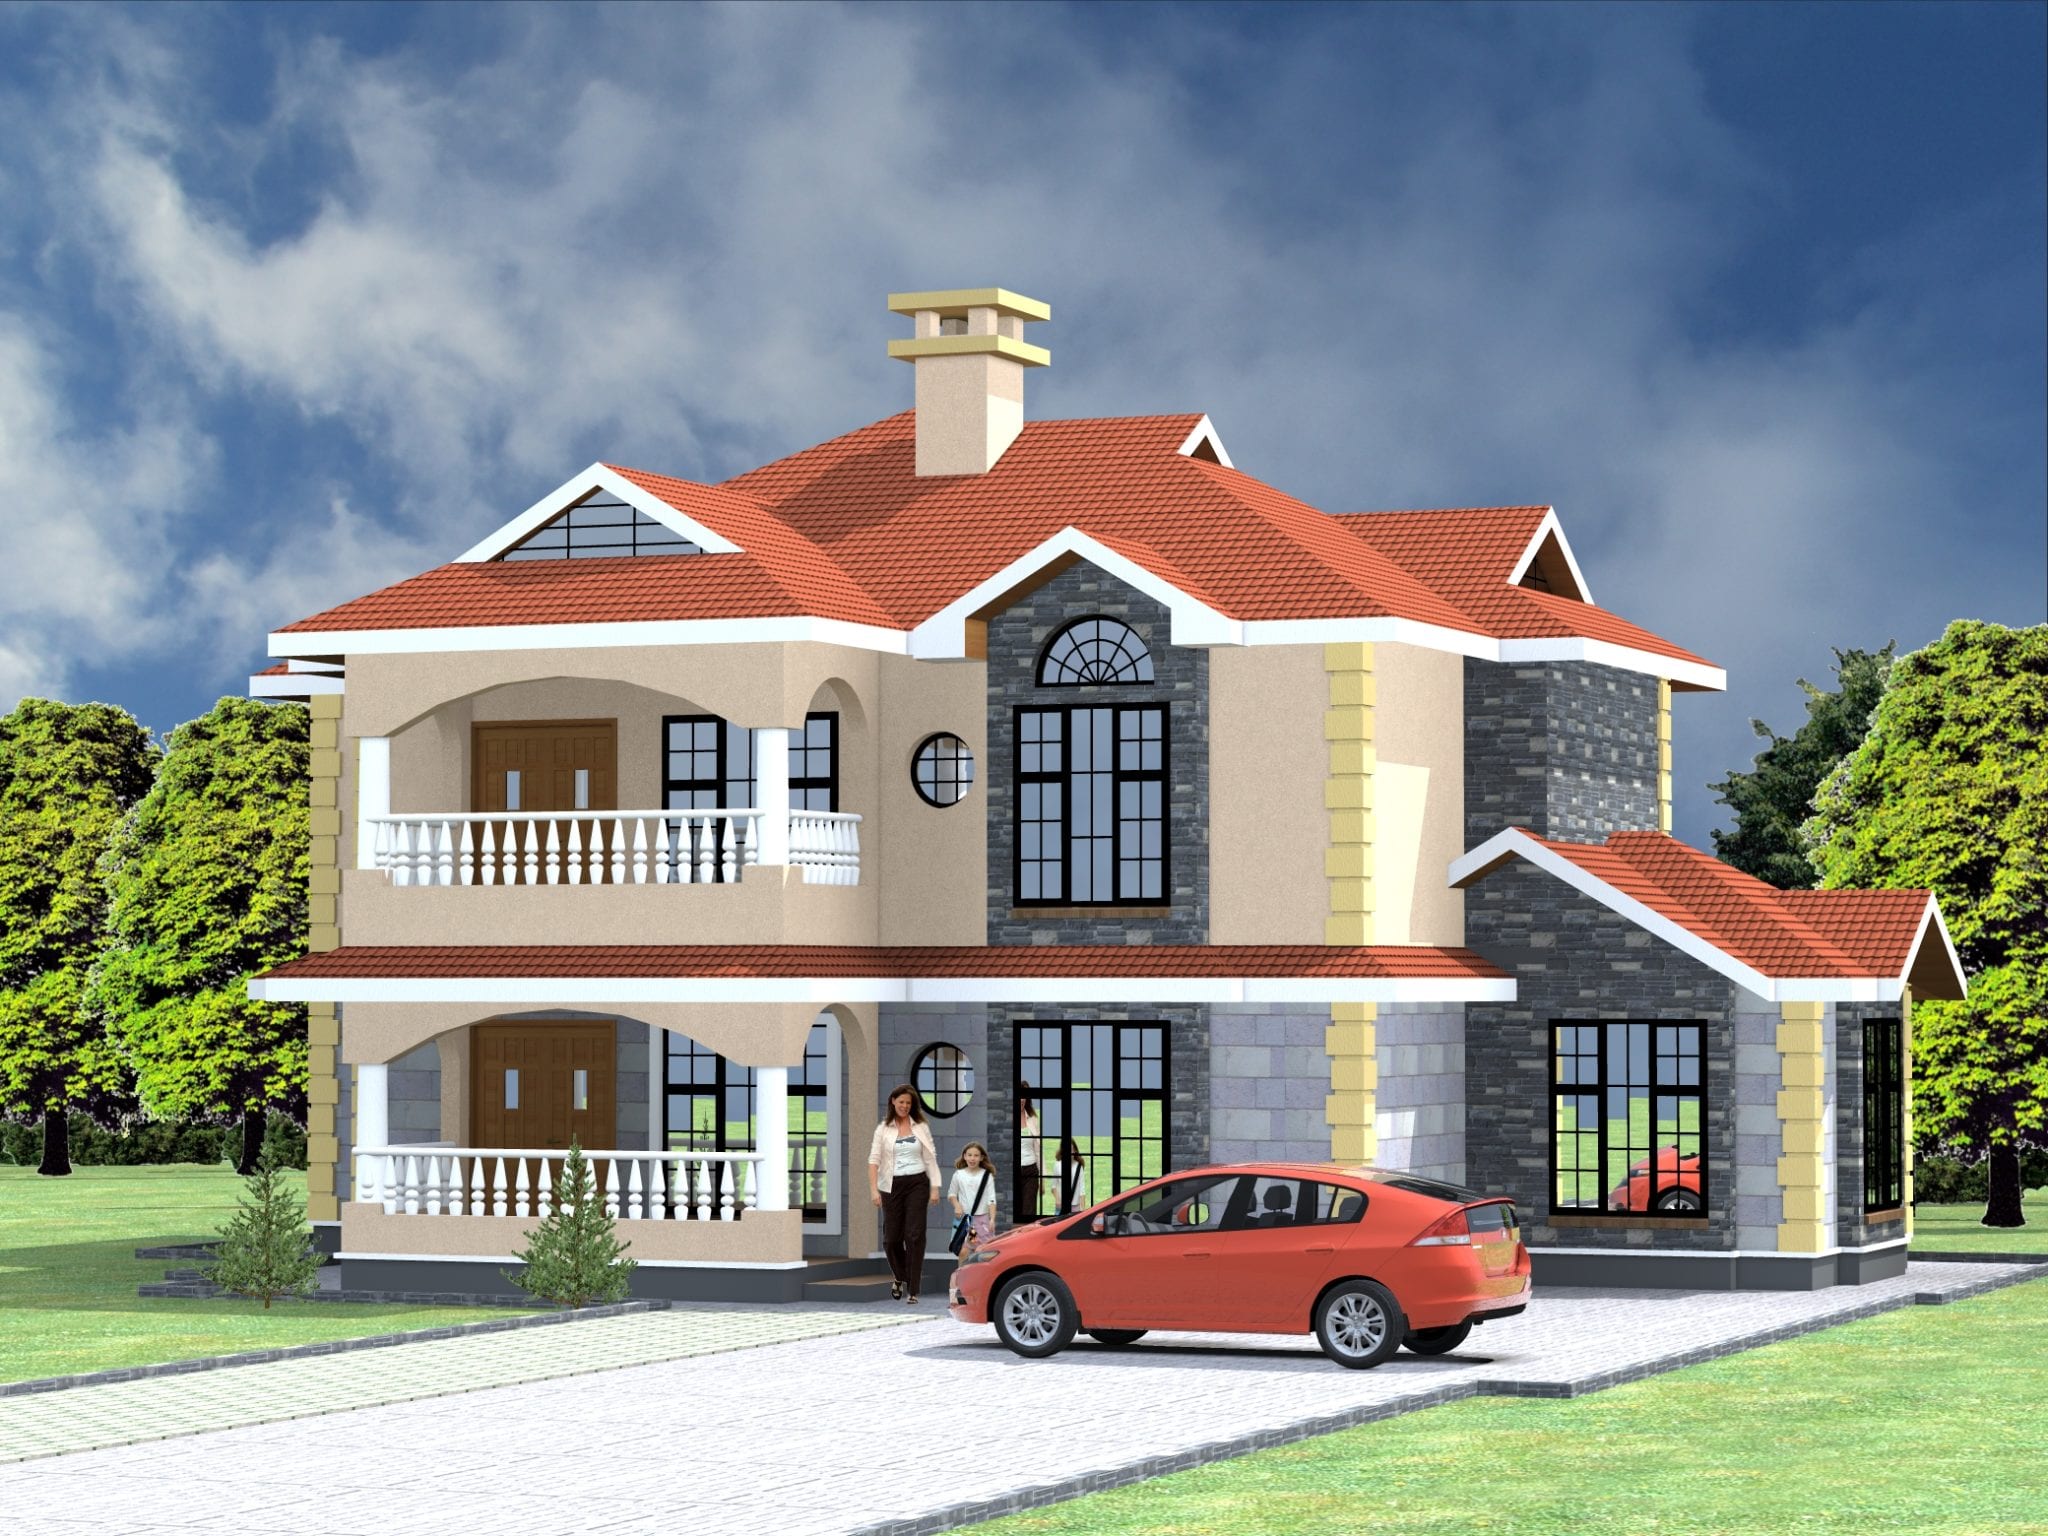 Beautiful House with Simple Roof Design 4 BR Maisonette 